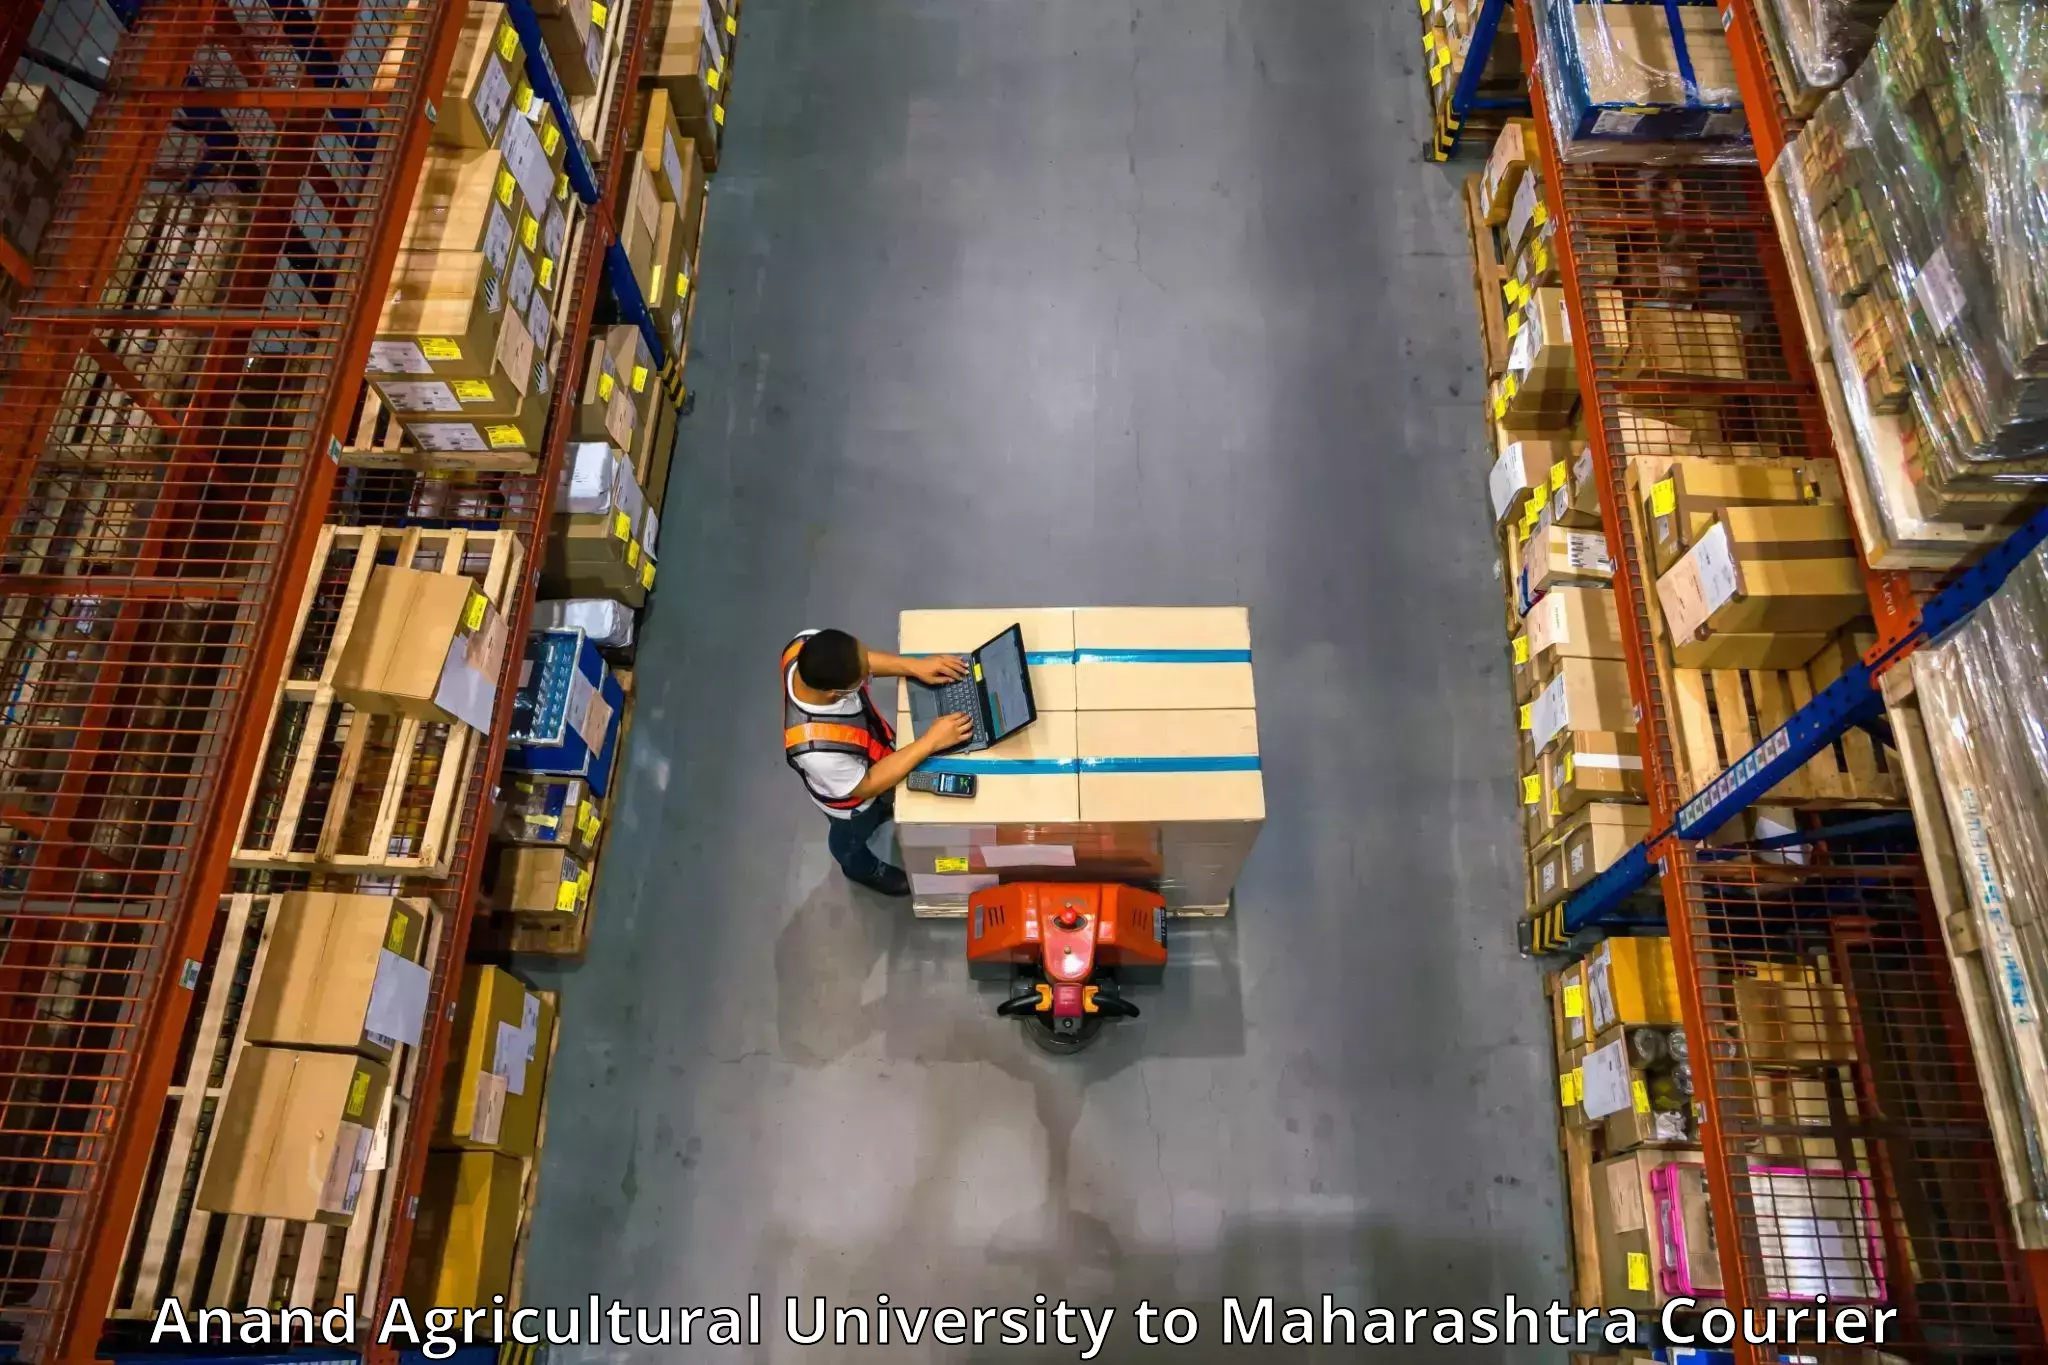 Expert furniture movers Anand Agricultural University to Maharashtra